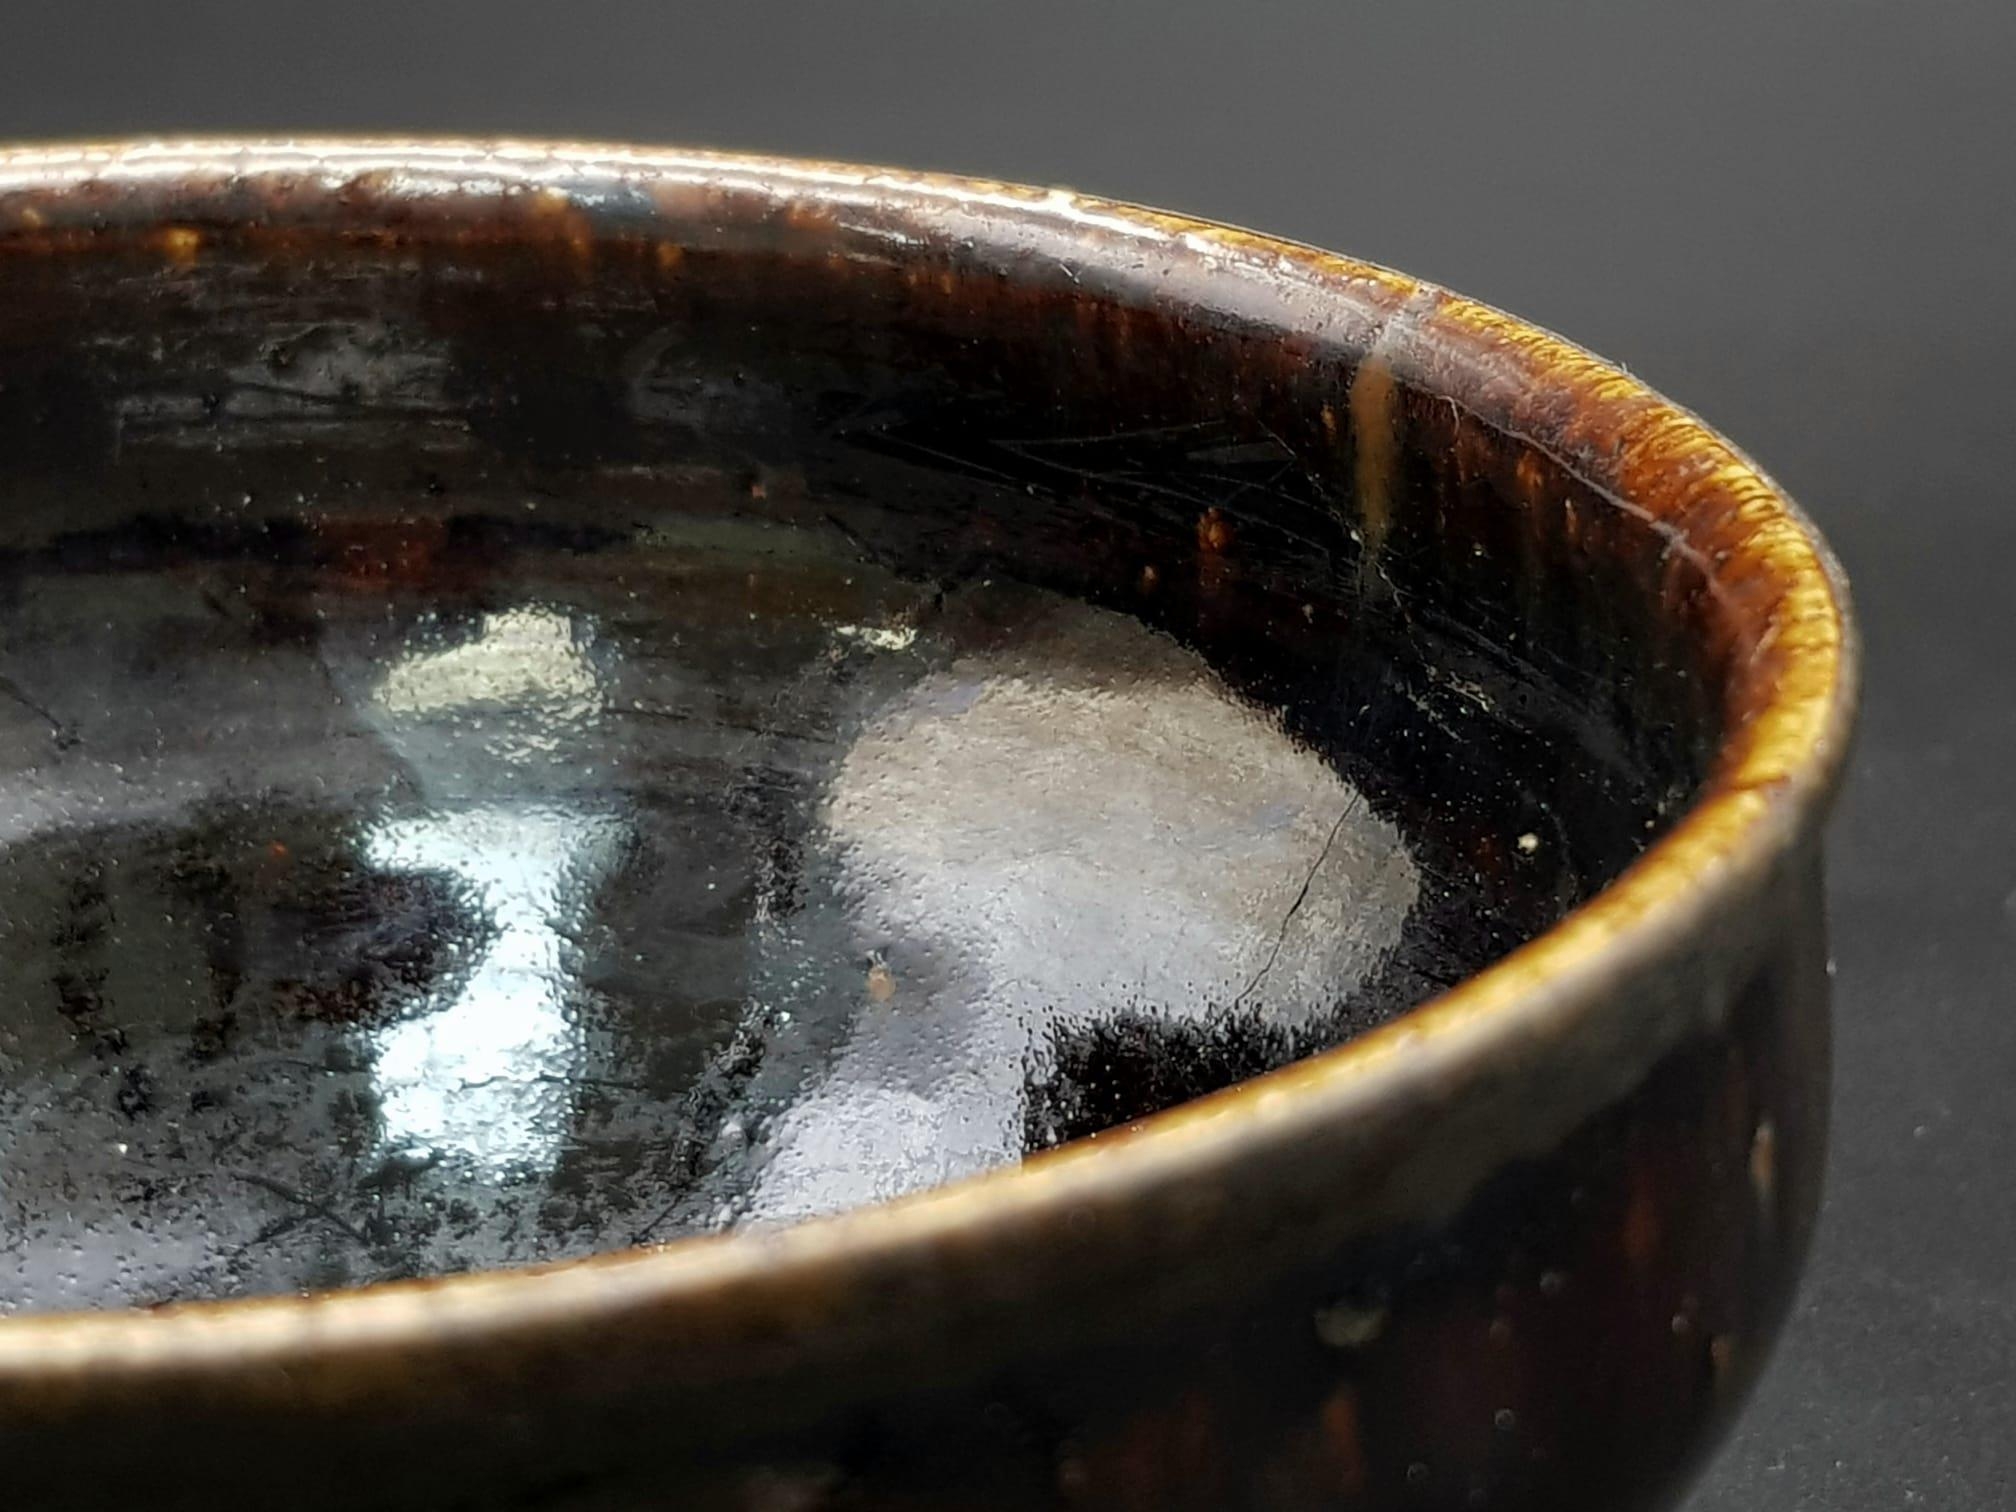 A VERY RARE CHINESE SONG PERIOD (900-1200) JIAN TEA BOWL , WITH A UNIQUE METAL BAND AROUND THE RIM - Bild 2 aus 6